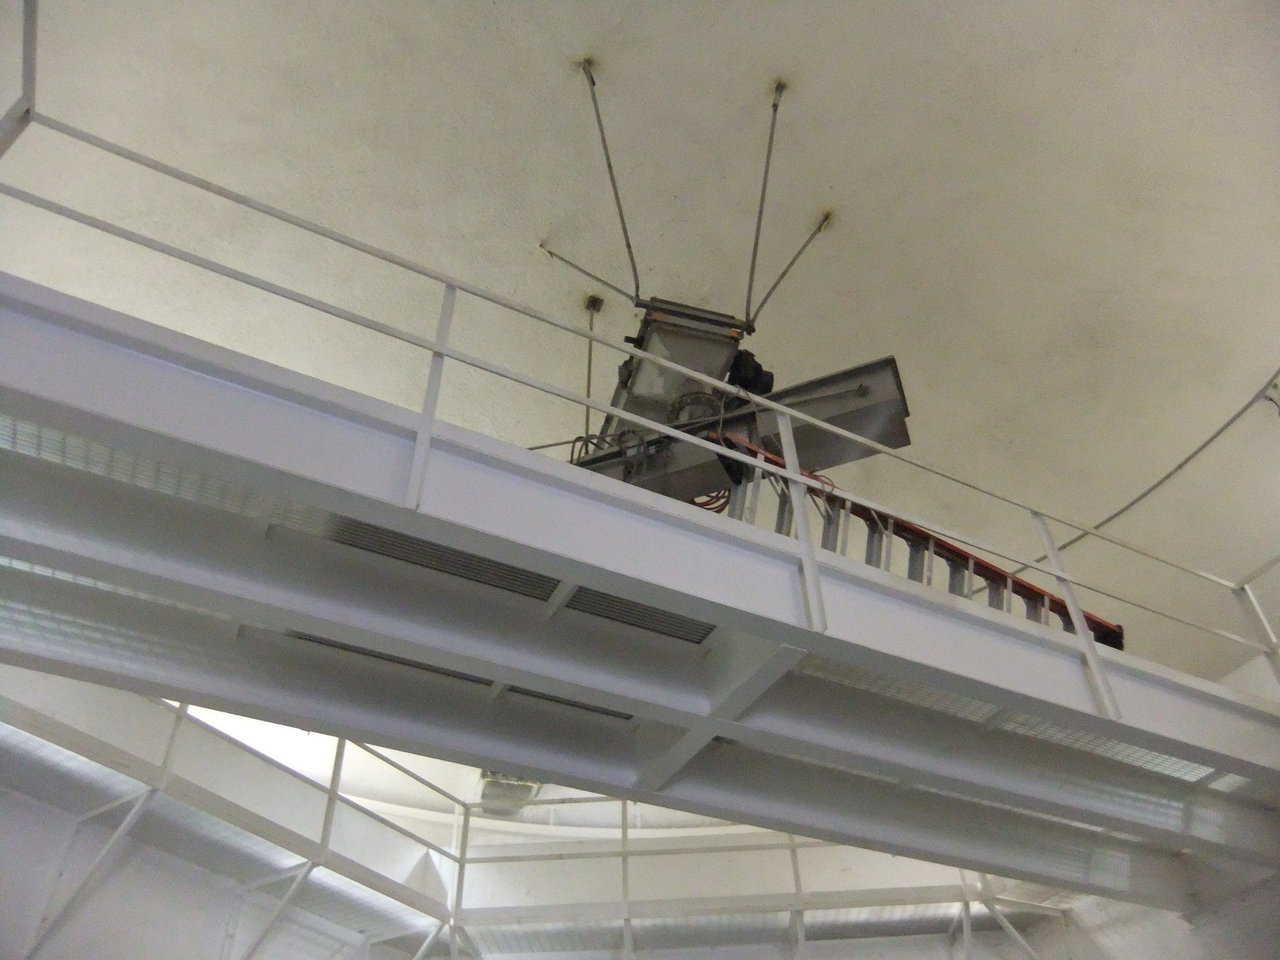 Easy access — Shown immediately above the camera is the catwalk that allows those operators to walk back and forth from one side of the bin walls to the other. From that catwalk they can service the inbound conveyor as well as the rotating conveyor. Note: Those are all supported from the five legs hanging down from the ceiling.